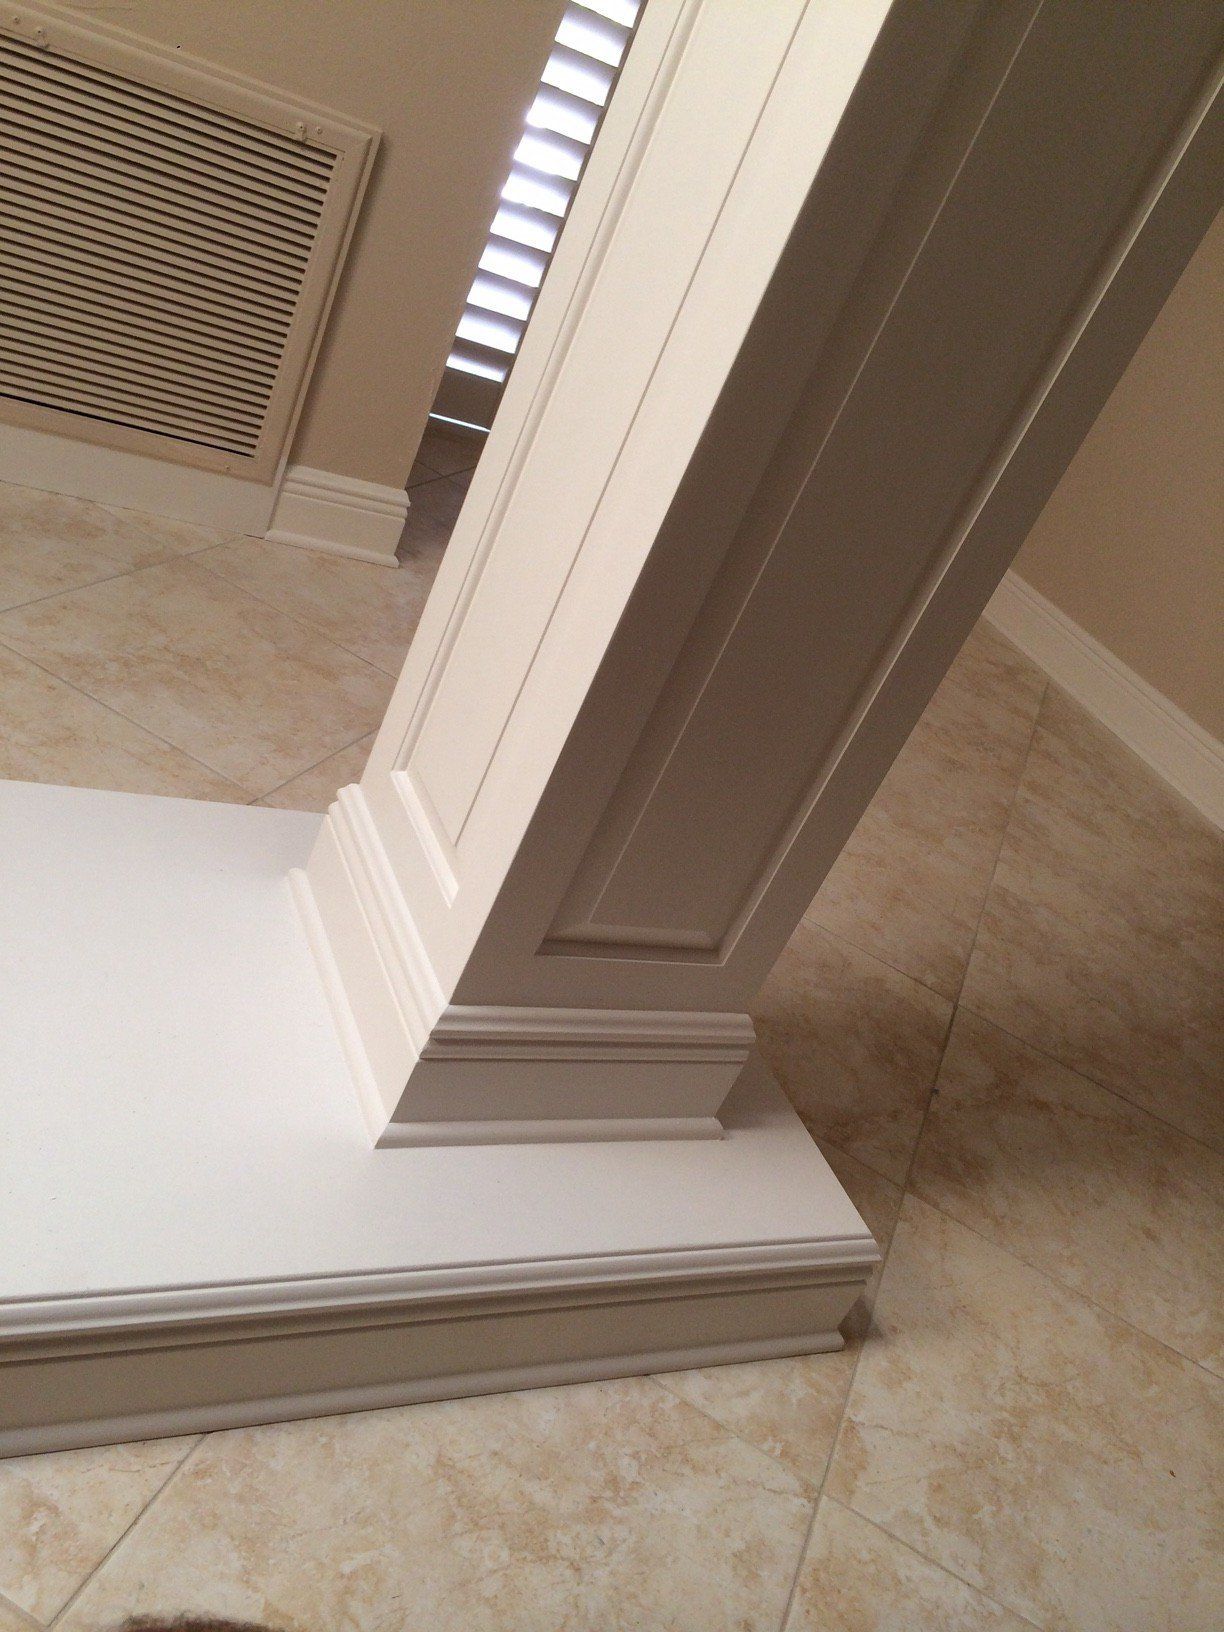 Molding and Trim